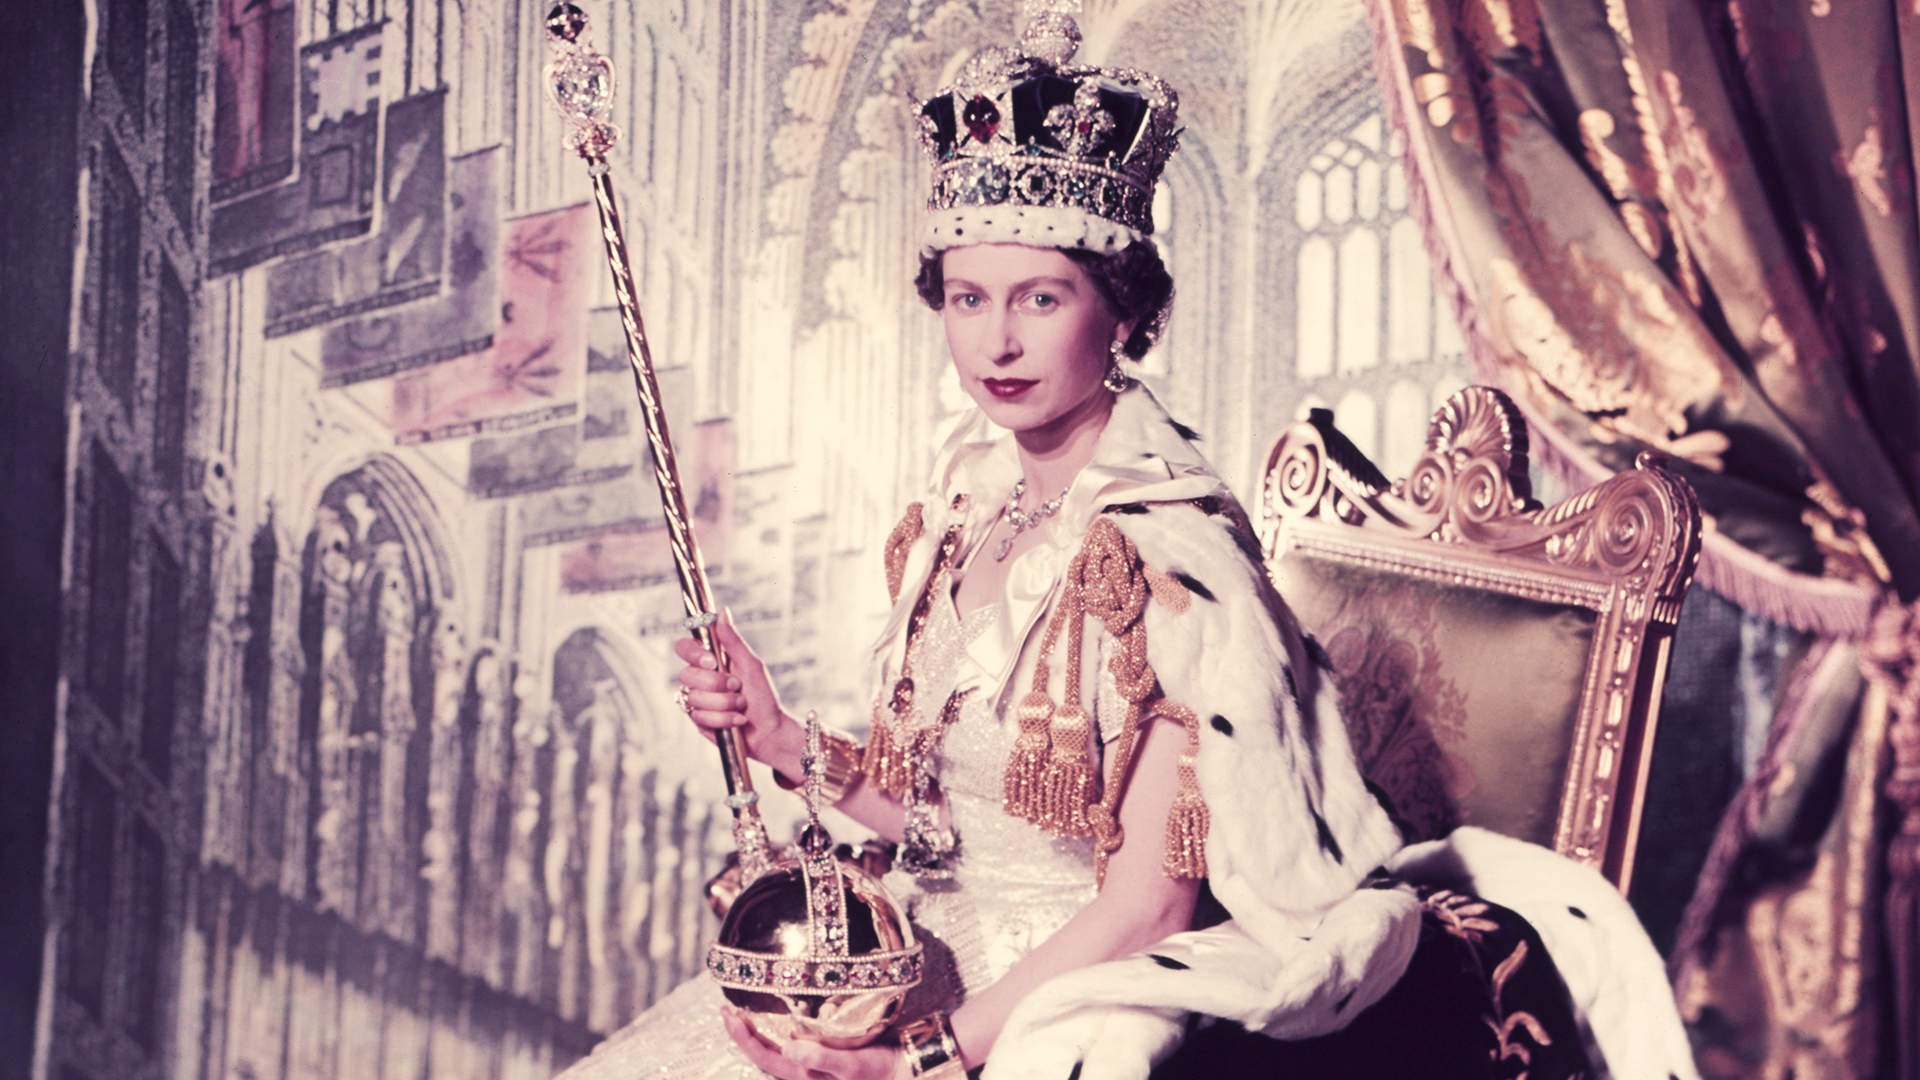 June 2 1953 Queen Elizabeth Ii Was Crowned The Monarch Of The United